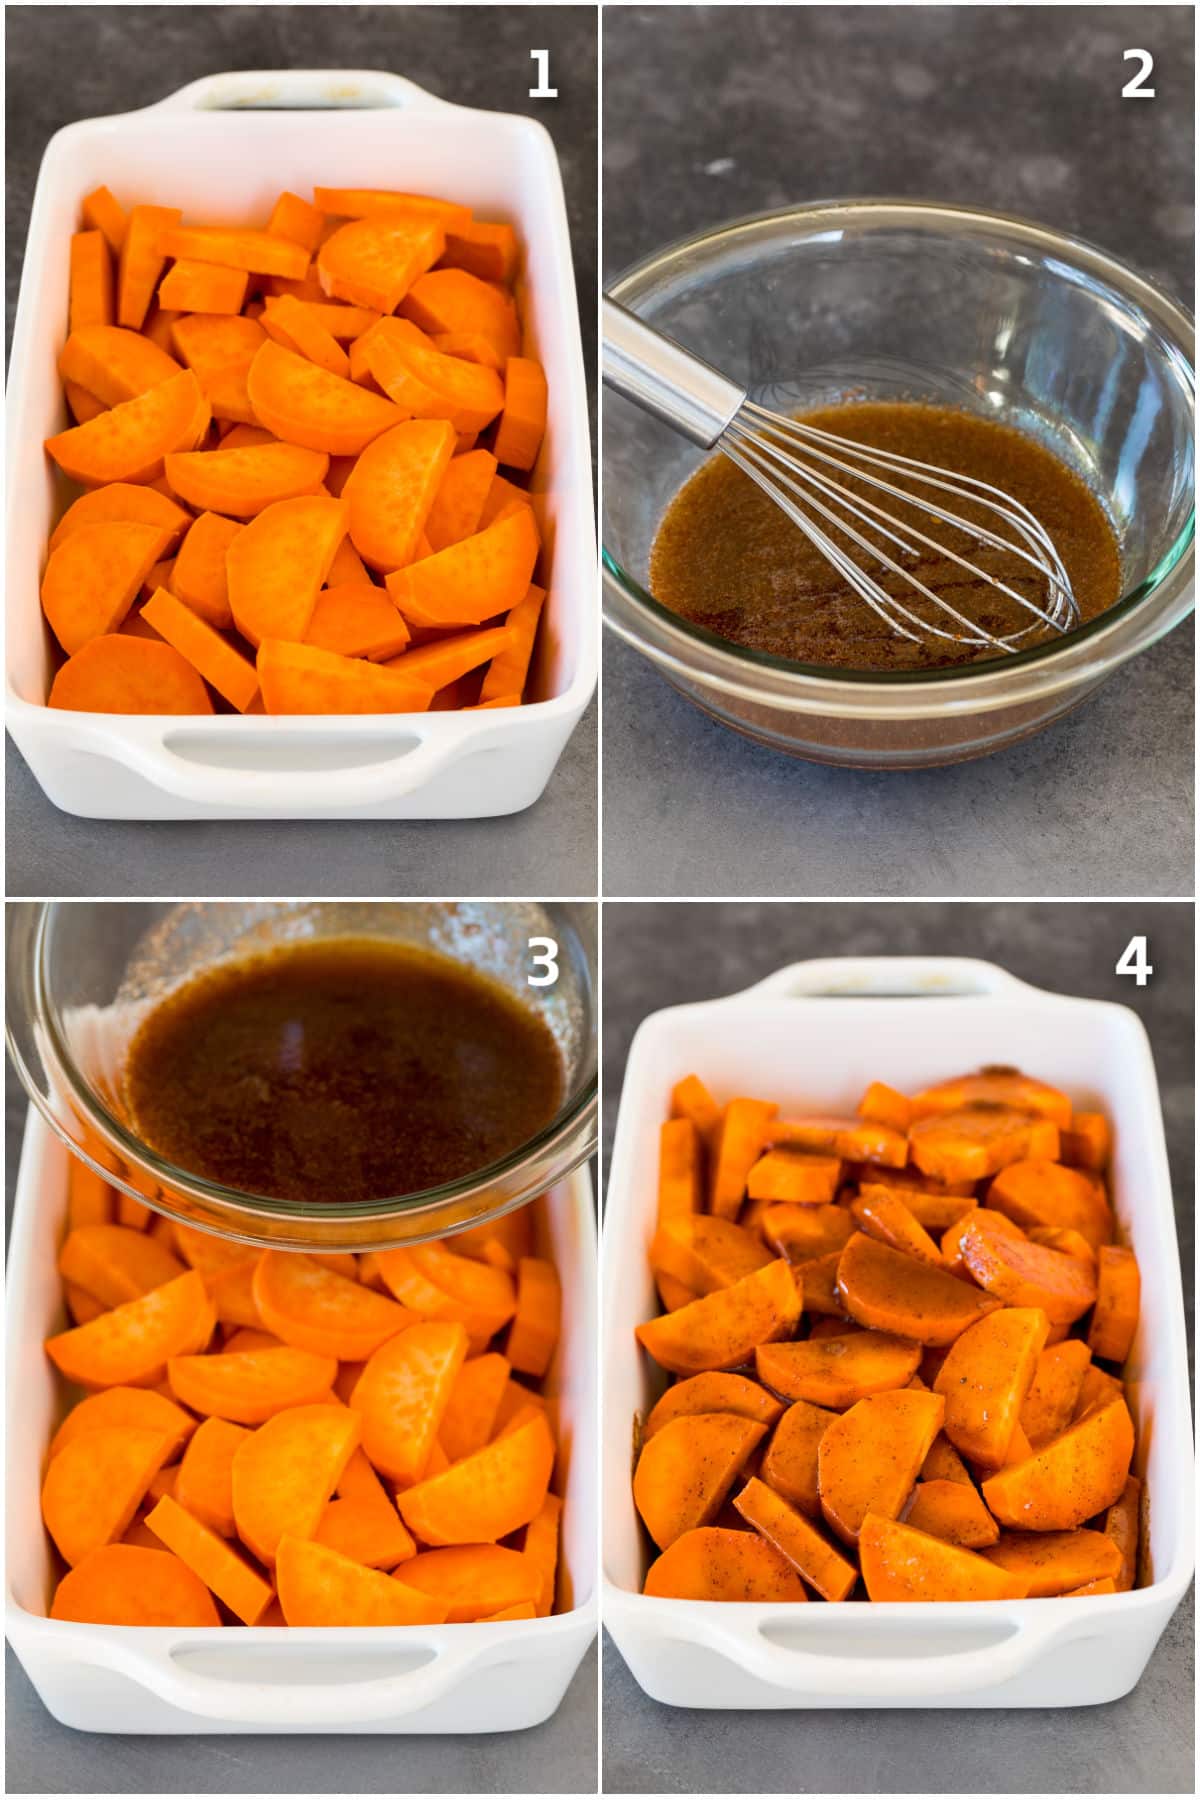 Step by step process shots showing how to make candied sweet potatoes.